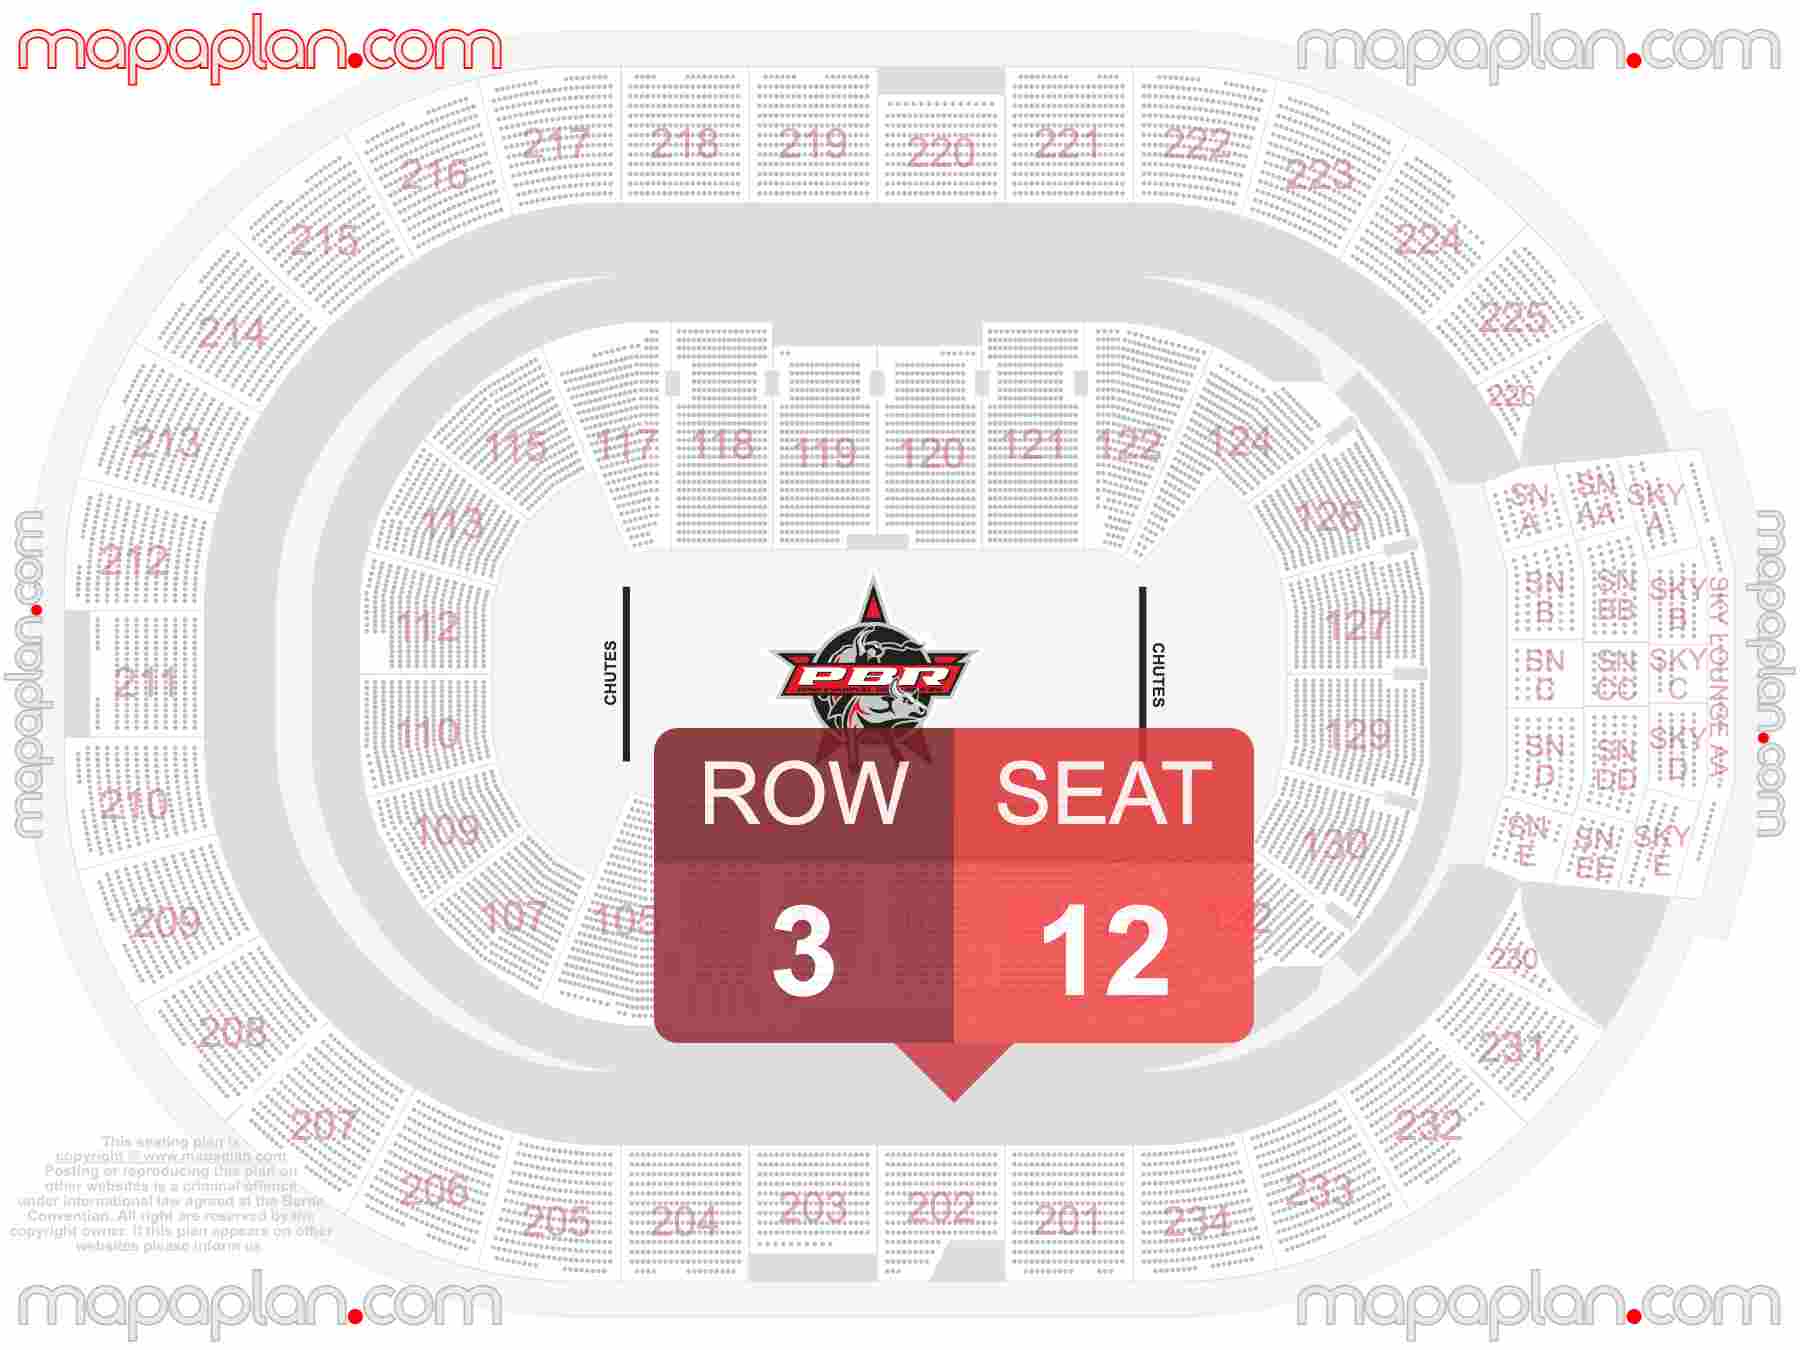 Edmonton Rogers Place seating map PBR Professional Bull Riders precise seat finder - Explore seating map with exact section, seat and row numbers